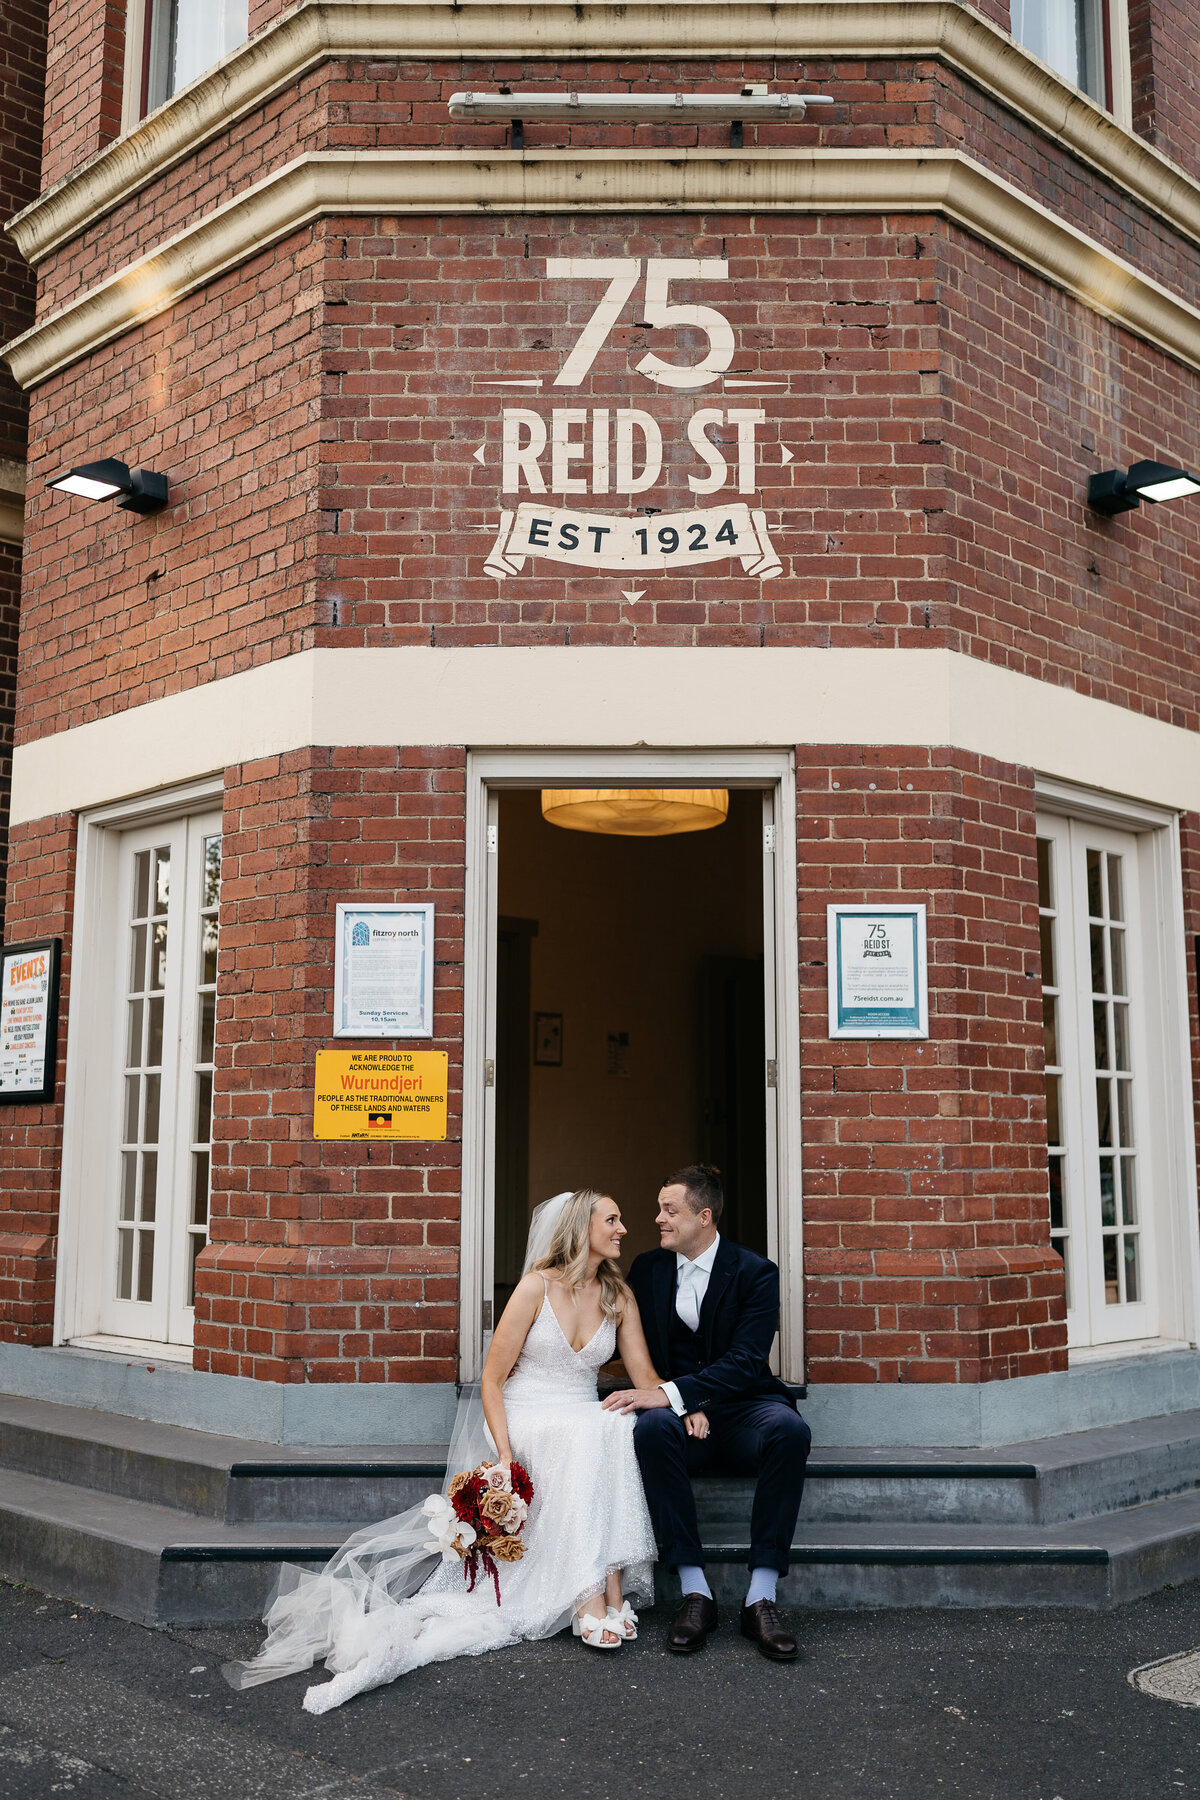 Courtney Laura Photography, Melbourne Wedding Photographer, Fitzroy Nth, 75 Reid St, Cath and Mitch-667